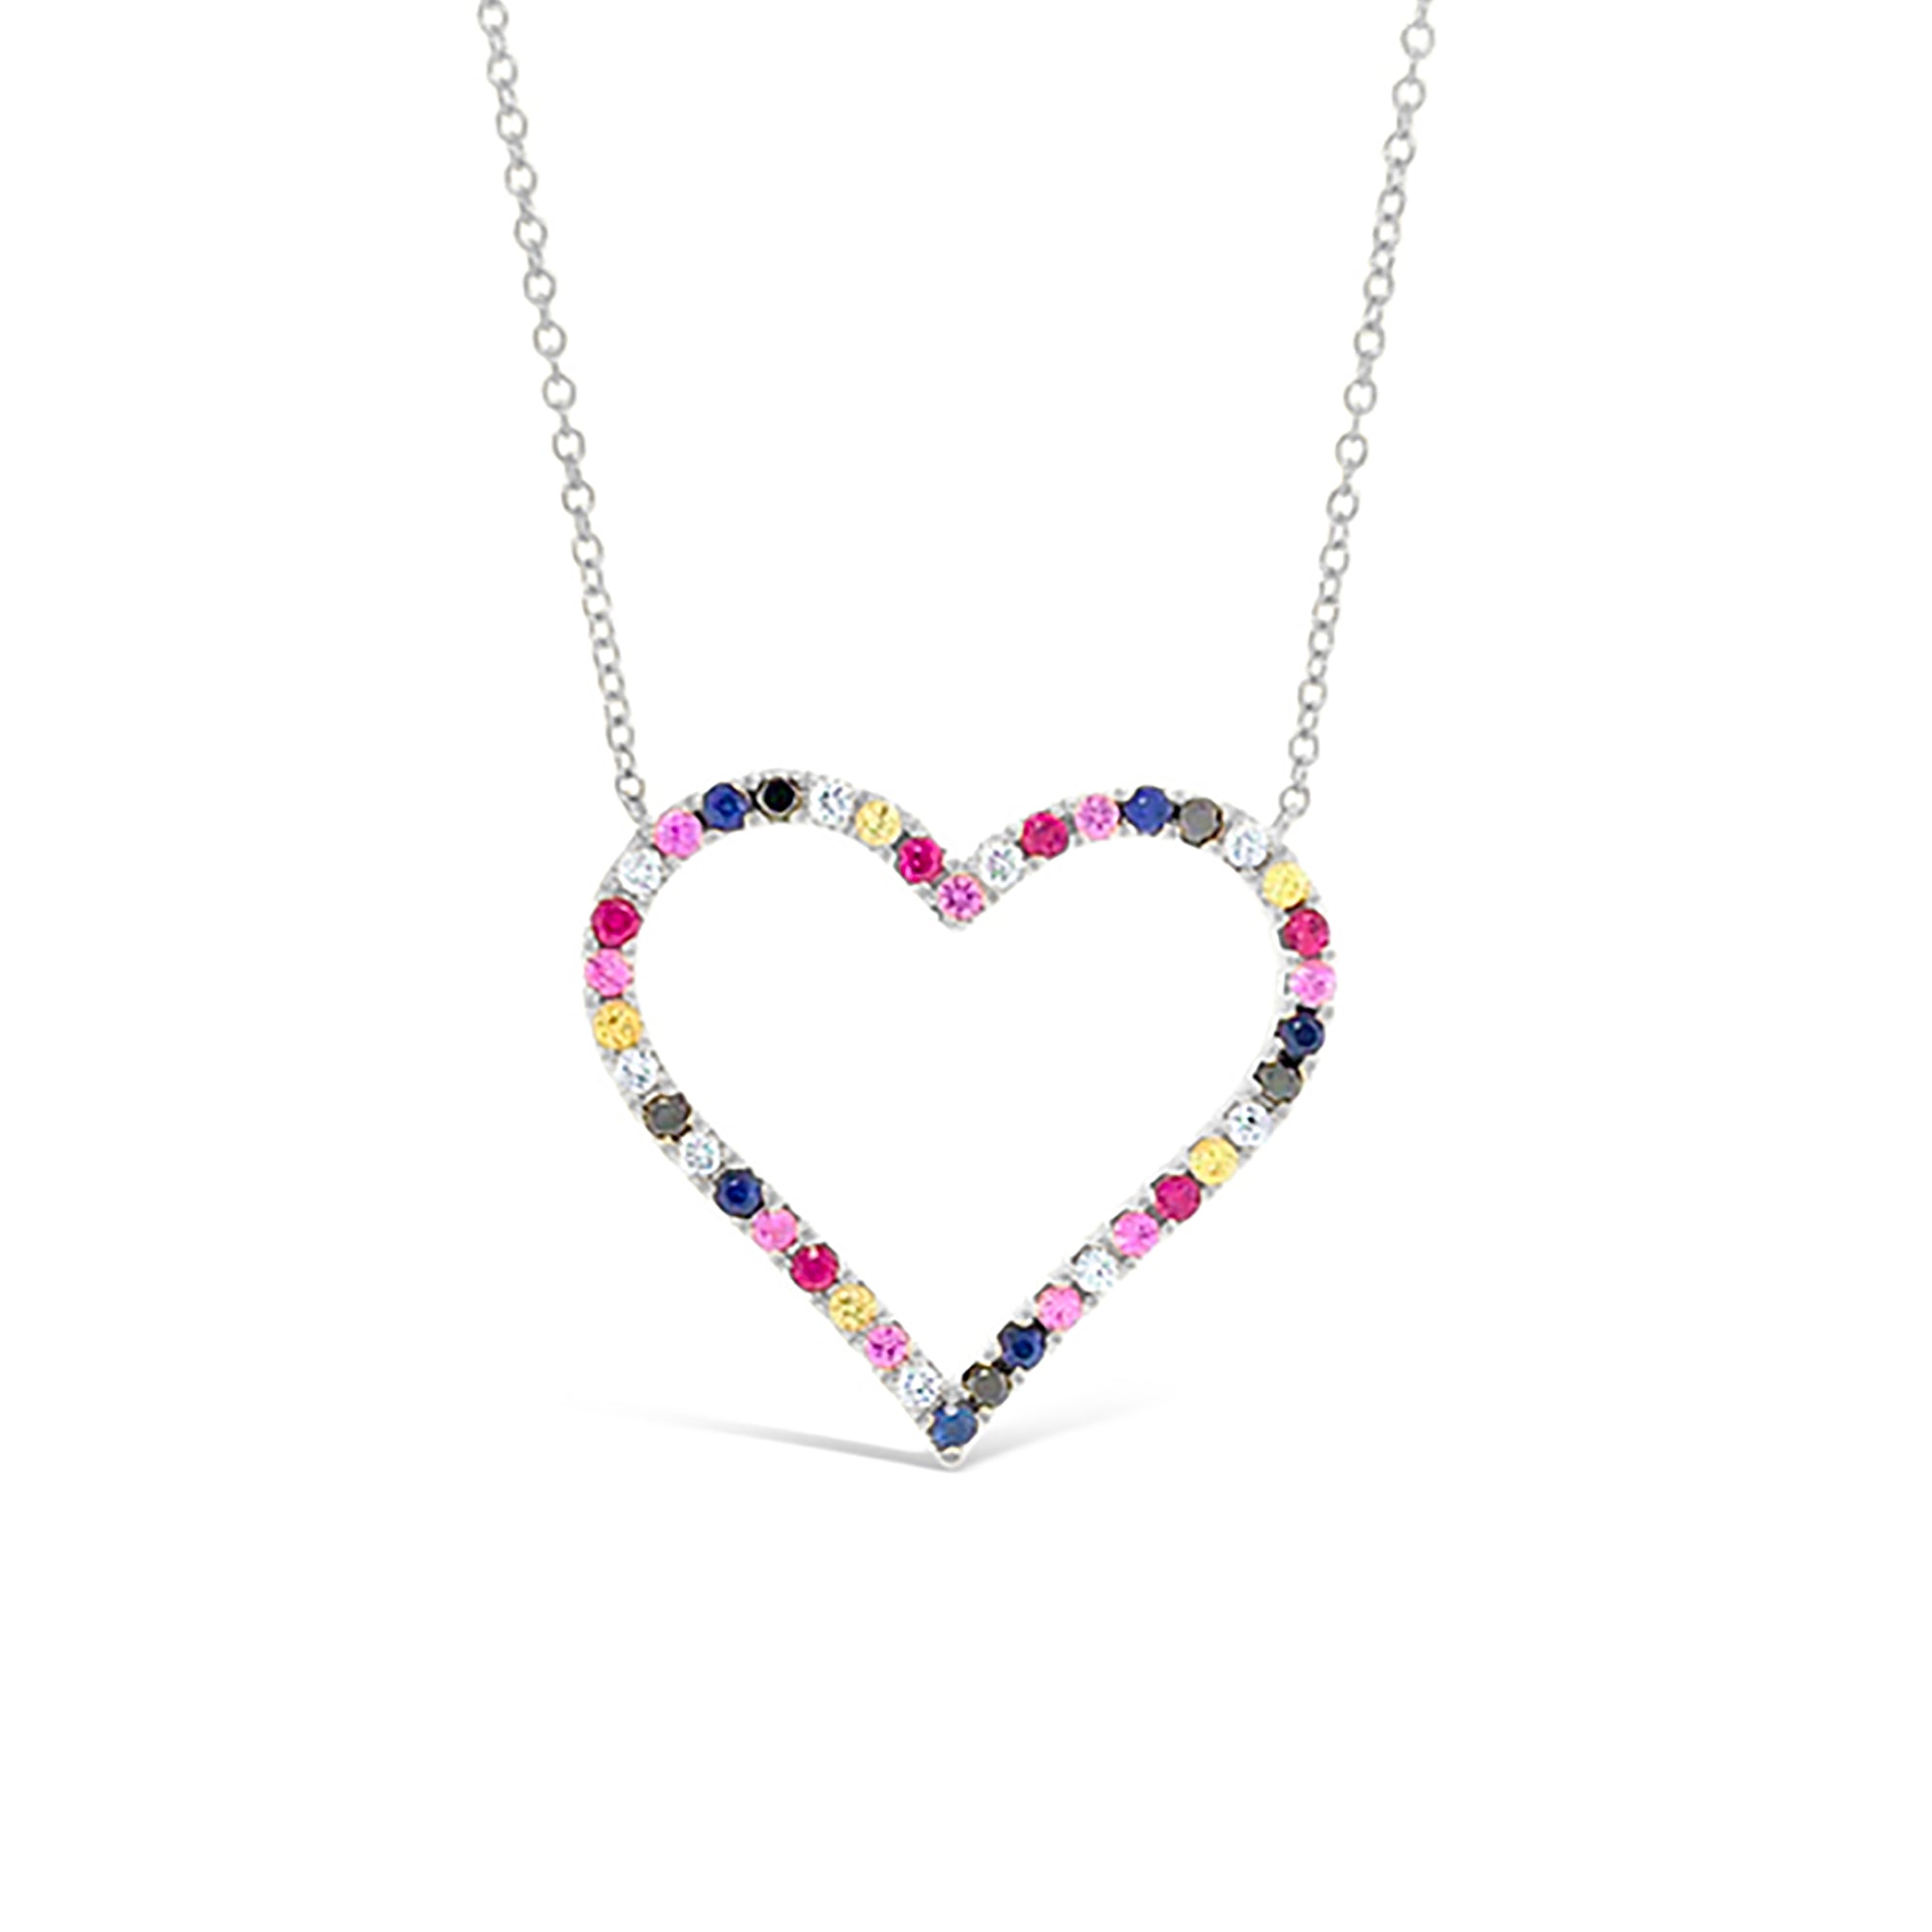 Diamond & Rainbow Gemstone Heart Pendant Necklace -14k rose gold weighing 3.30 grams -31 multi-colored stones weighing .57 carats -9 round diamond weighing .12 carats